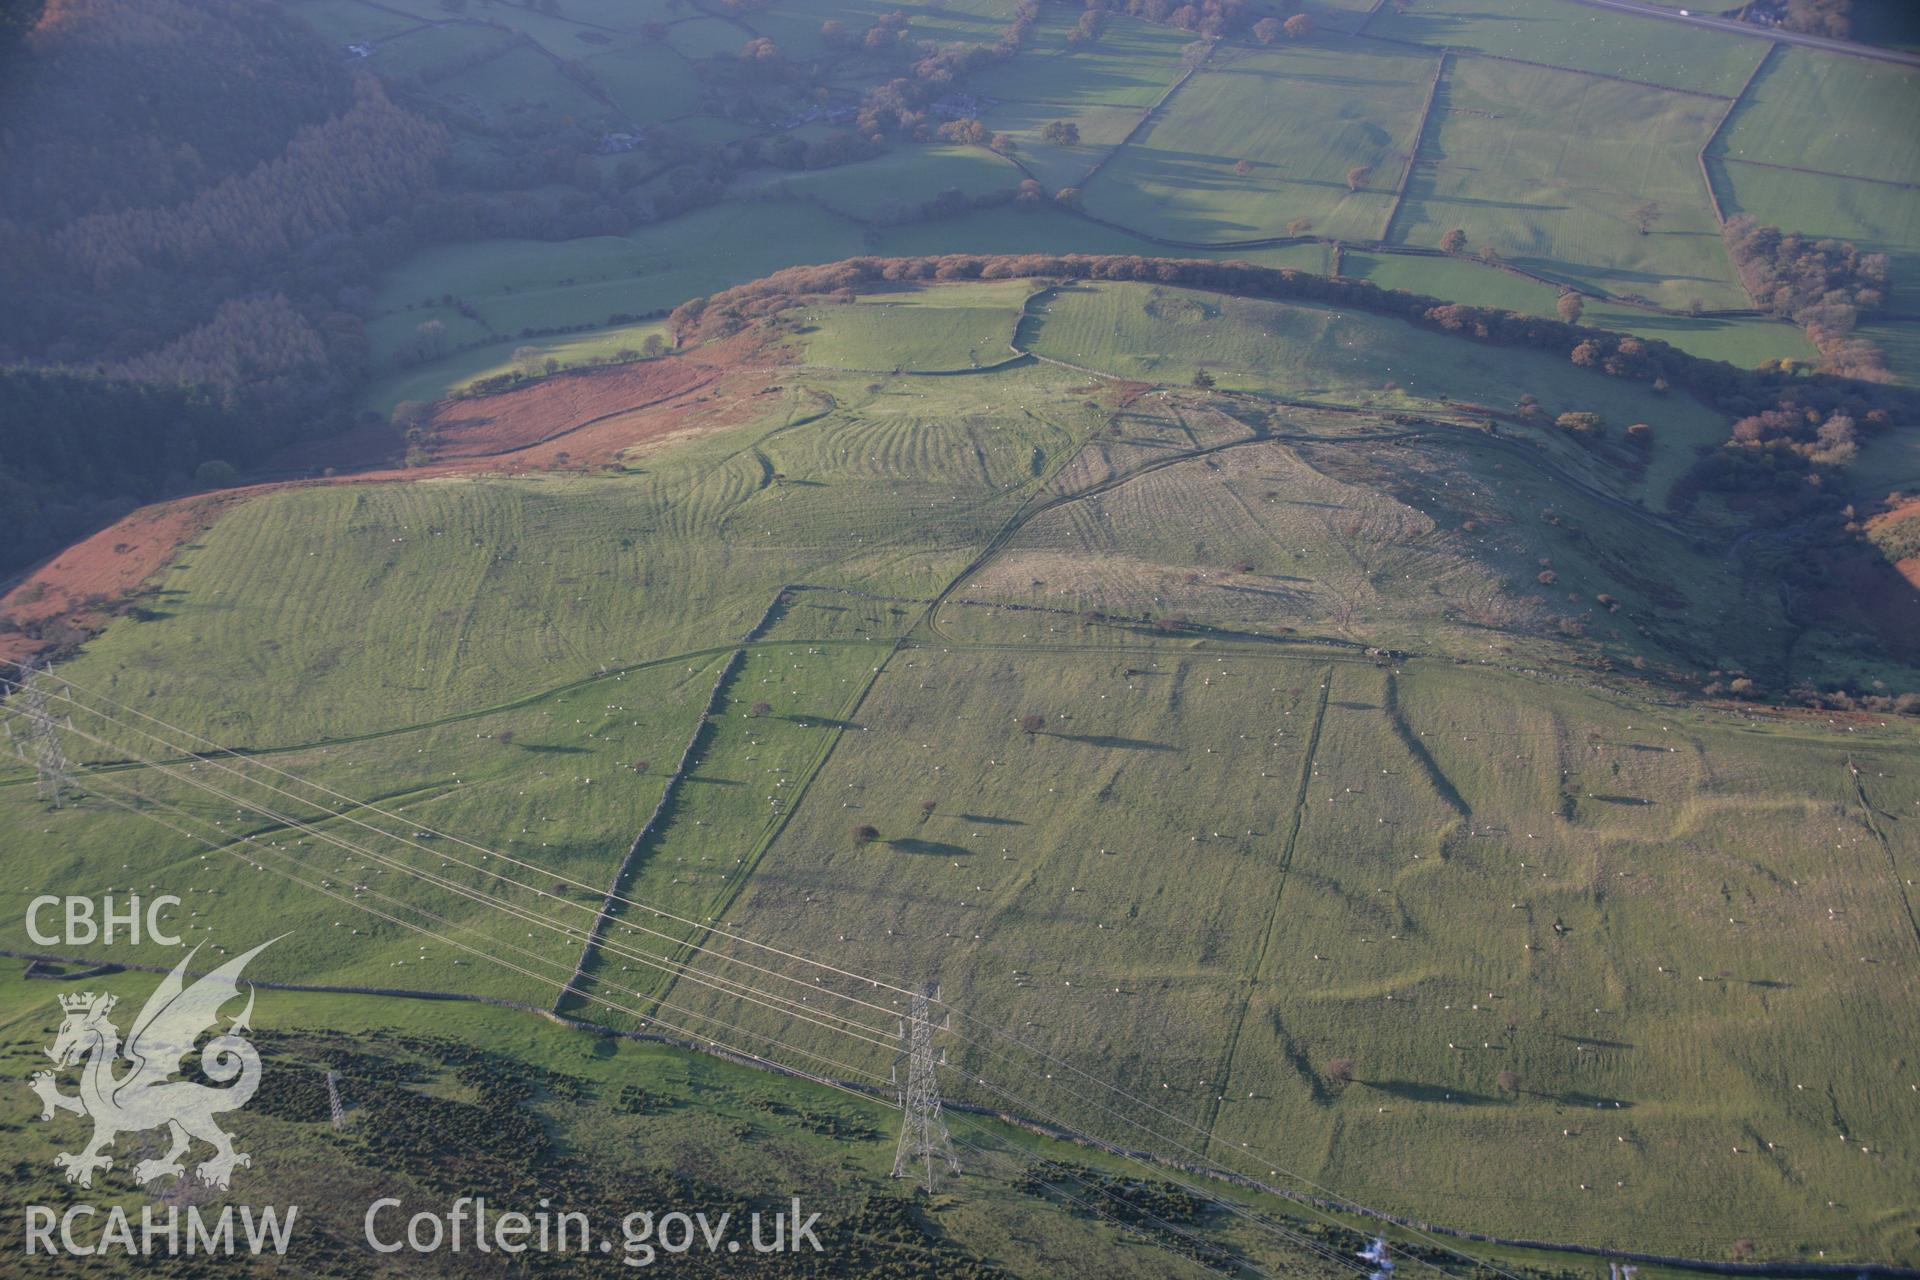 RCAHMW colour oblique aerial photograph of Ffridd Ddu Field System from the south-west. Taken on 21 November 2005 by Toby Driver